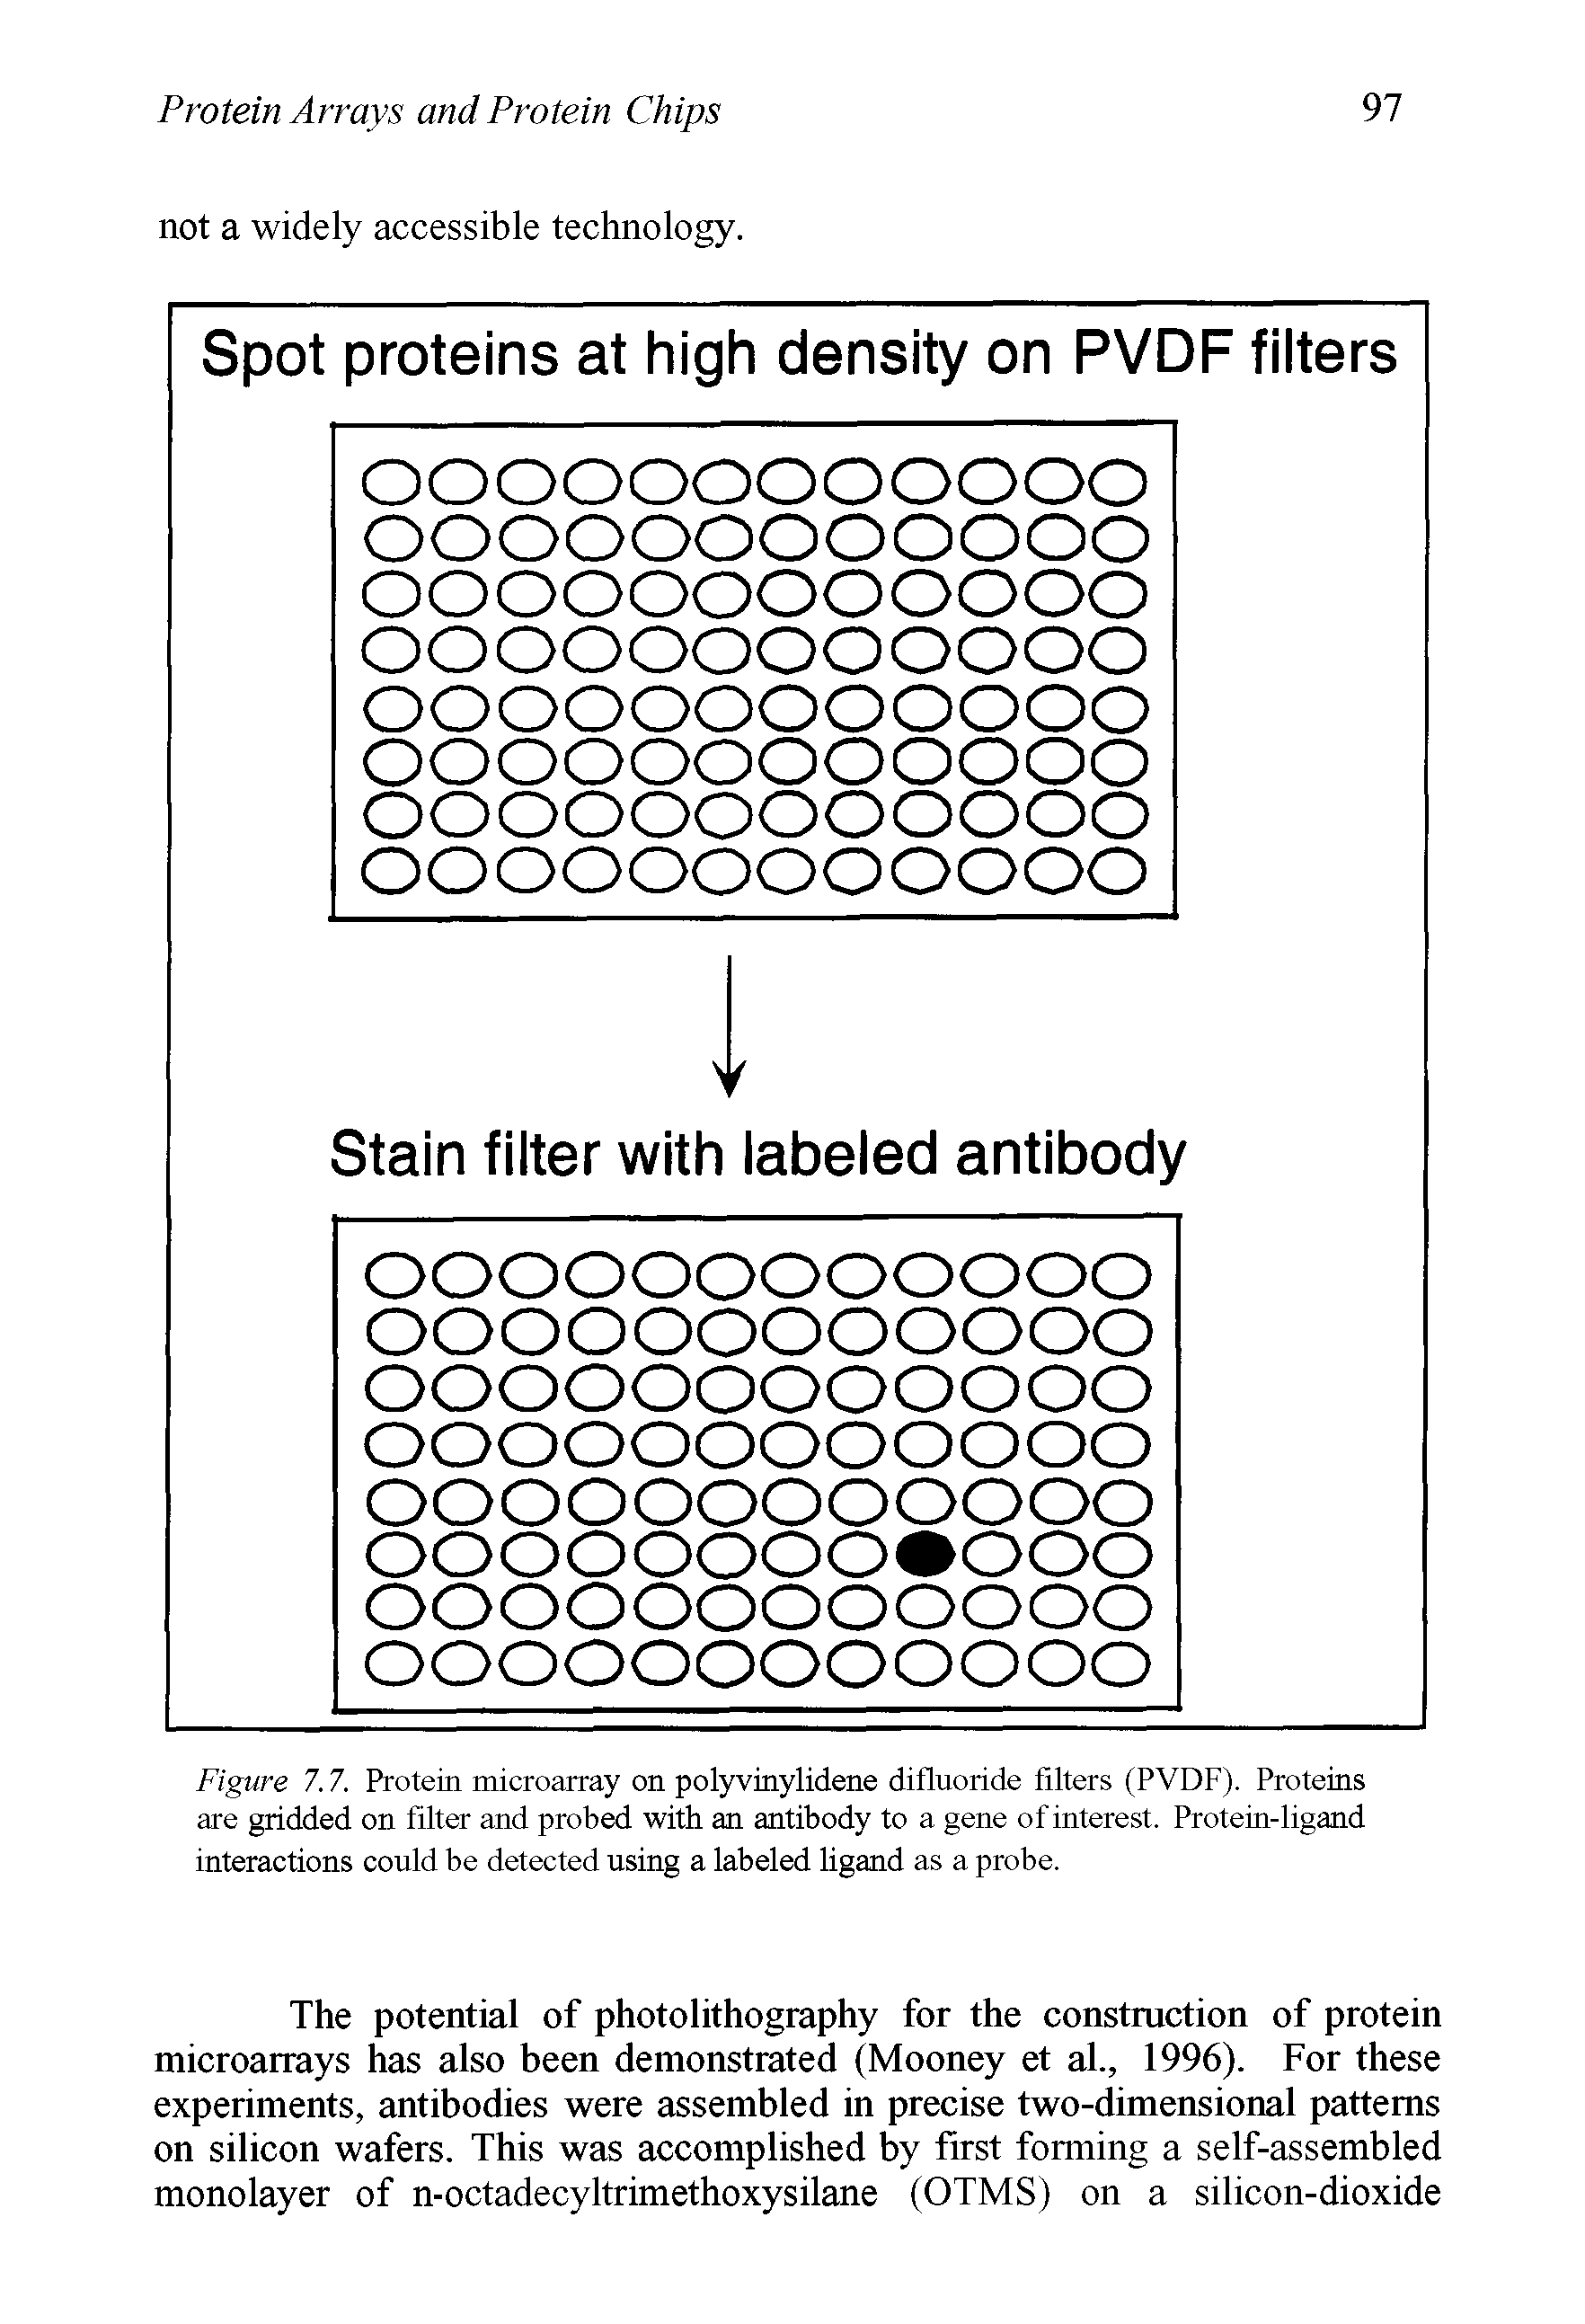 Figure 7.7. Protein microarray on polyvinylidene difluoride filters (PVDF). Proteins are gridded on filter and probed with an antibody to a gene of interest. Protein-ligand interactions could be detected using a labeled ligand as a probe.